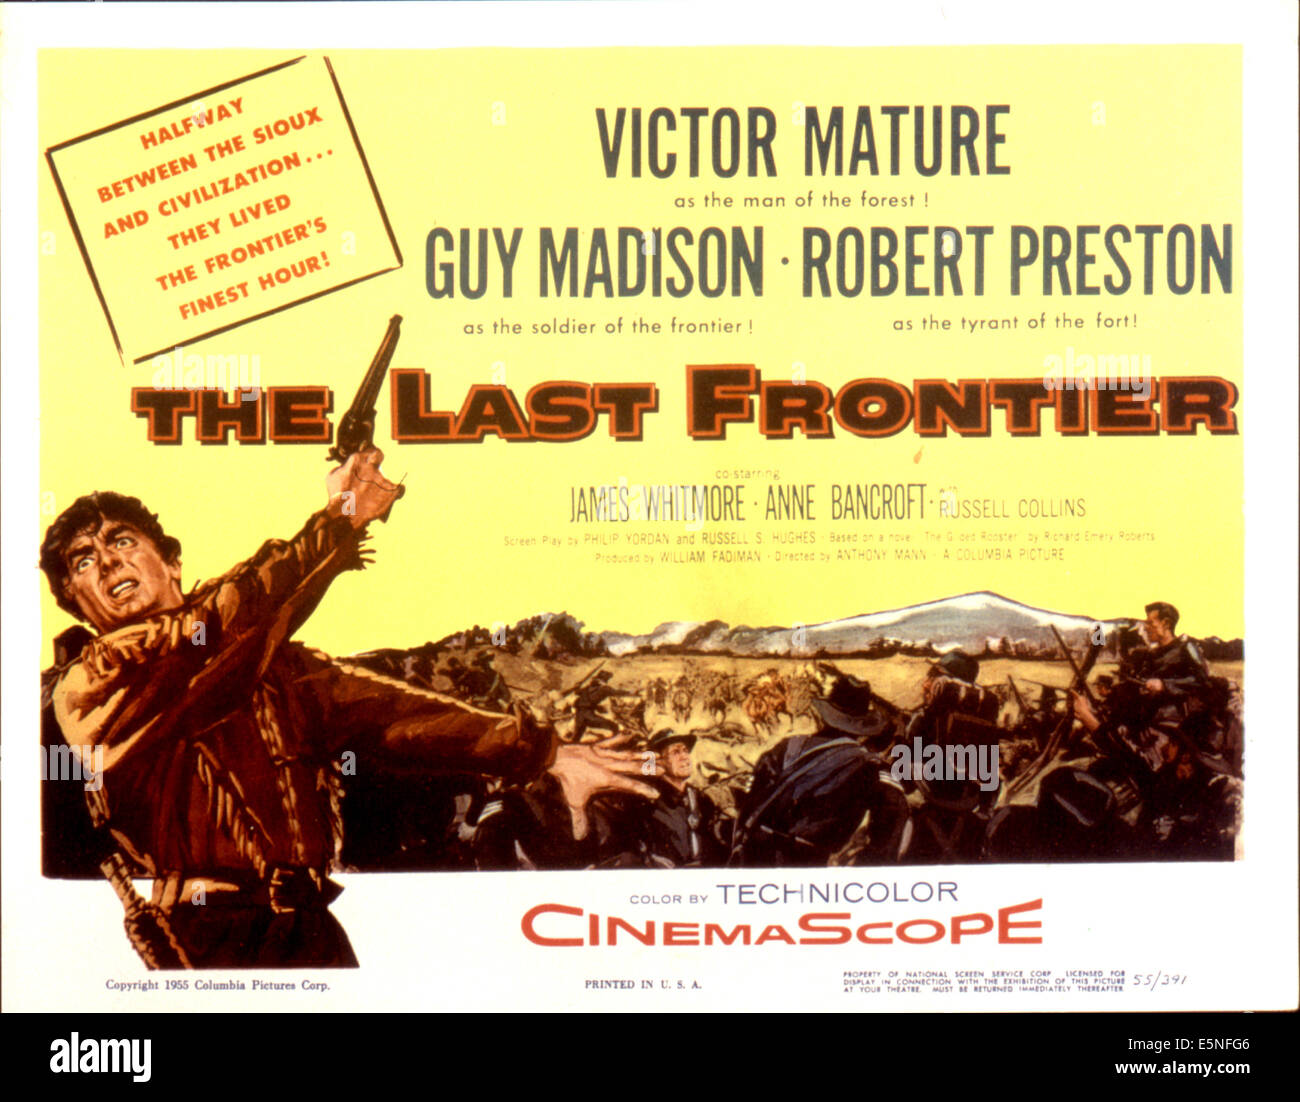 THE LAST FRONTIER, Victor Mature, lobby card poster art, 1955 Stock Photo